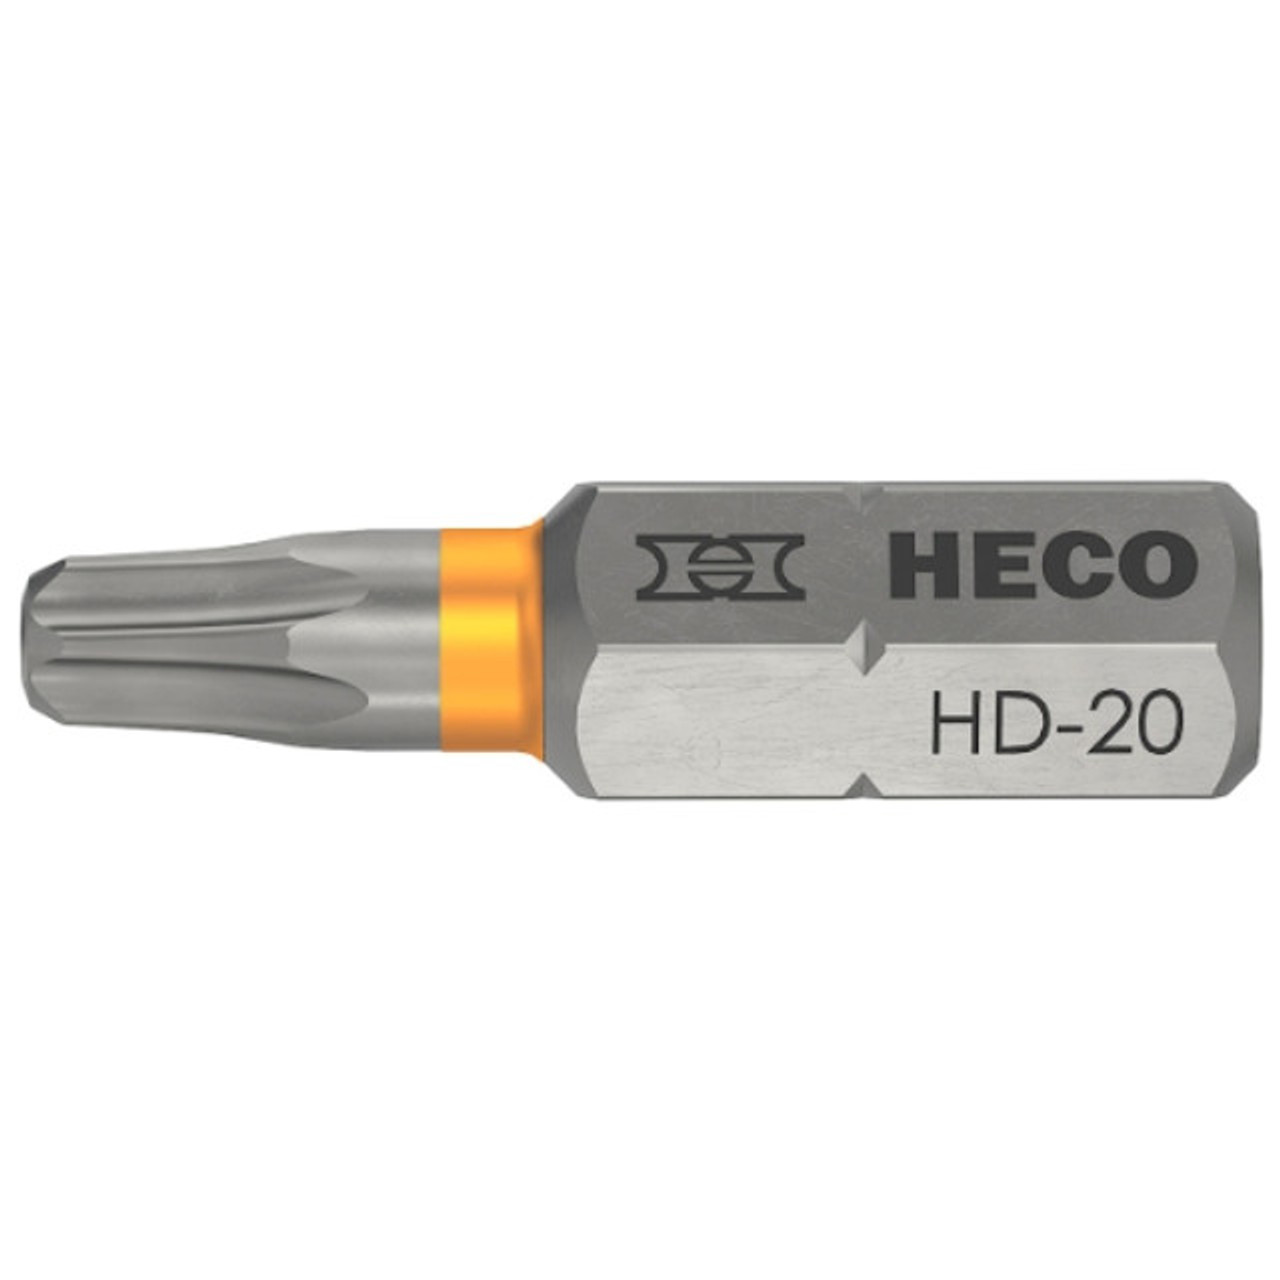 HECO Schrauben Drive Bits | Pack of 2 T20 / HD20 Drive Bits for Torx Drive, Deck Building, Carpentry, Coastal Construction, Trade Supplies and Deck Builders